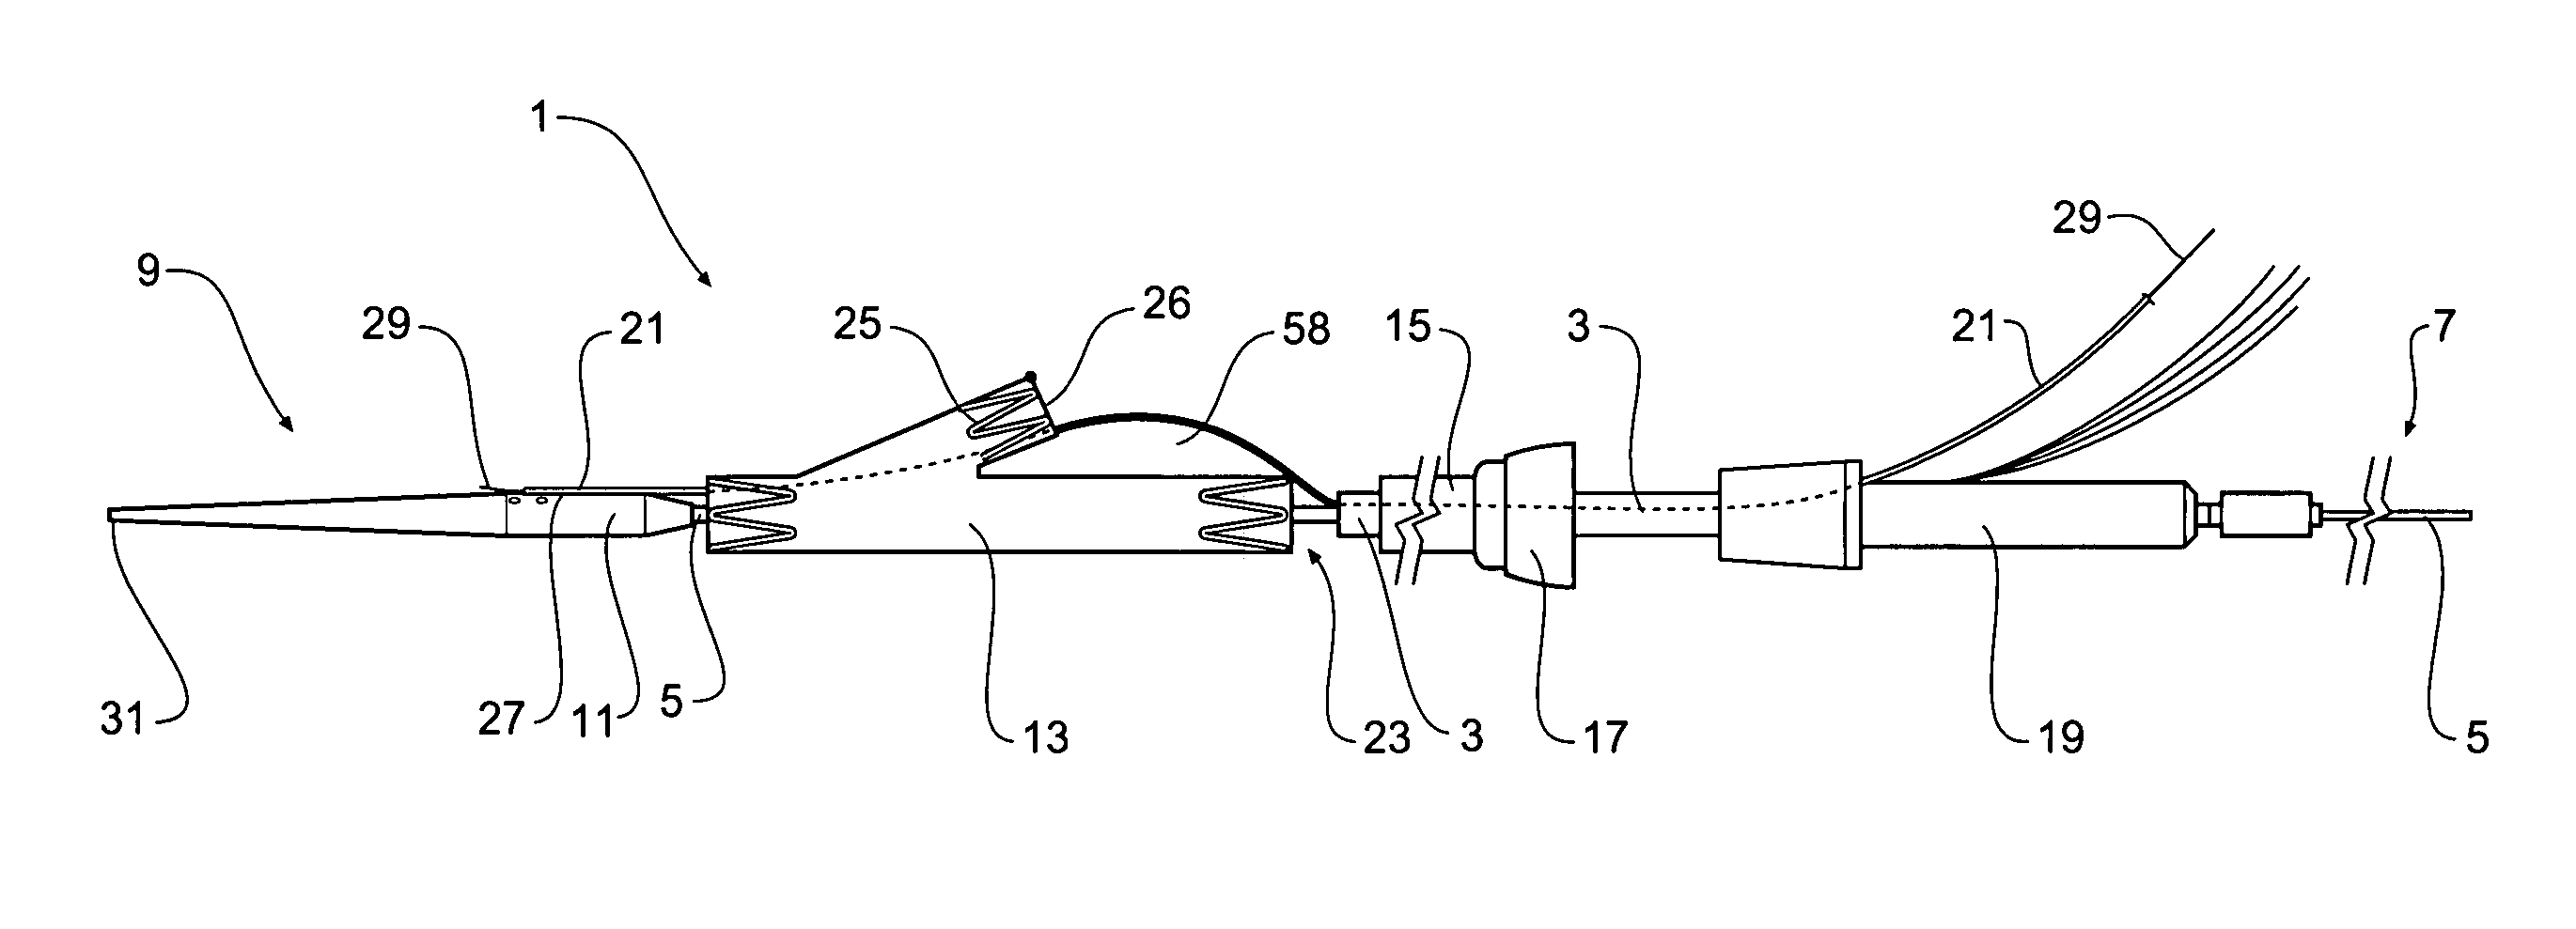 Introducer for an iliac side branch device